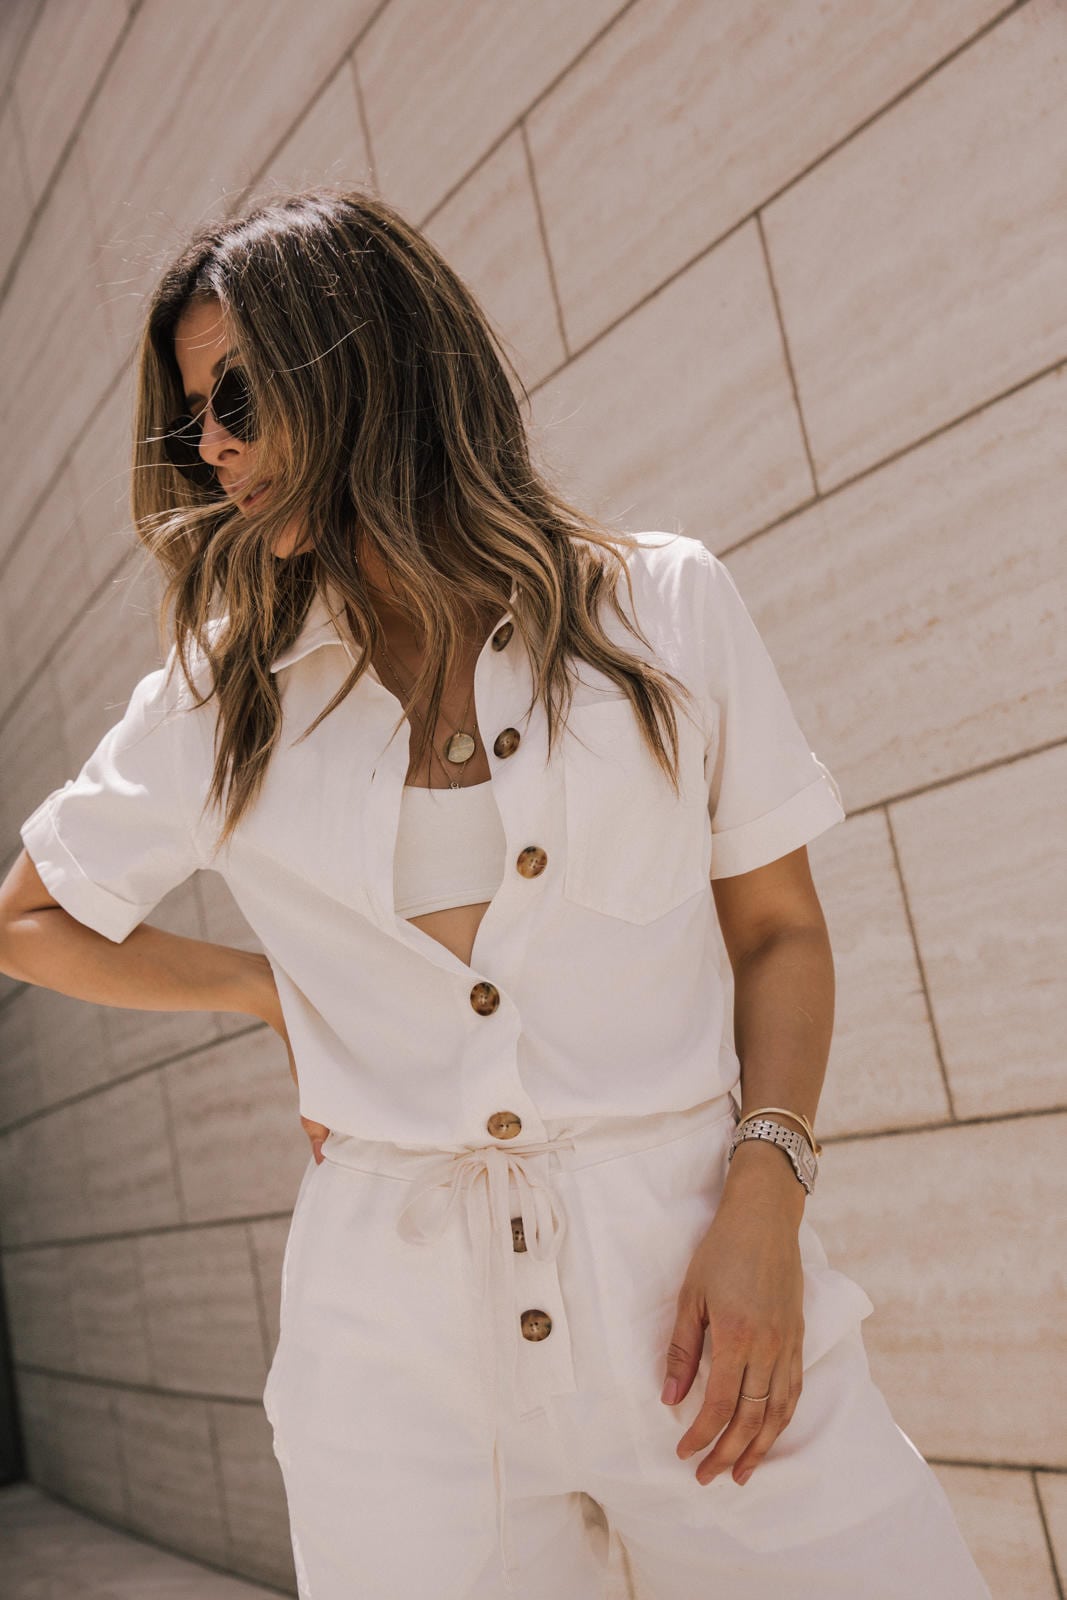 July 4 Outfits You’ll Want to Wear All Summer Long - The Girl from Panama